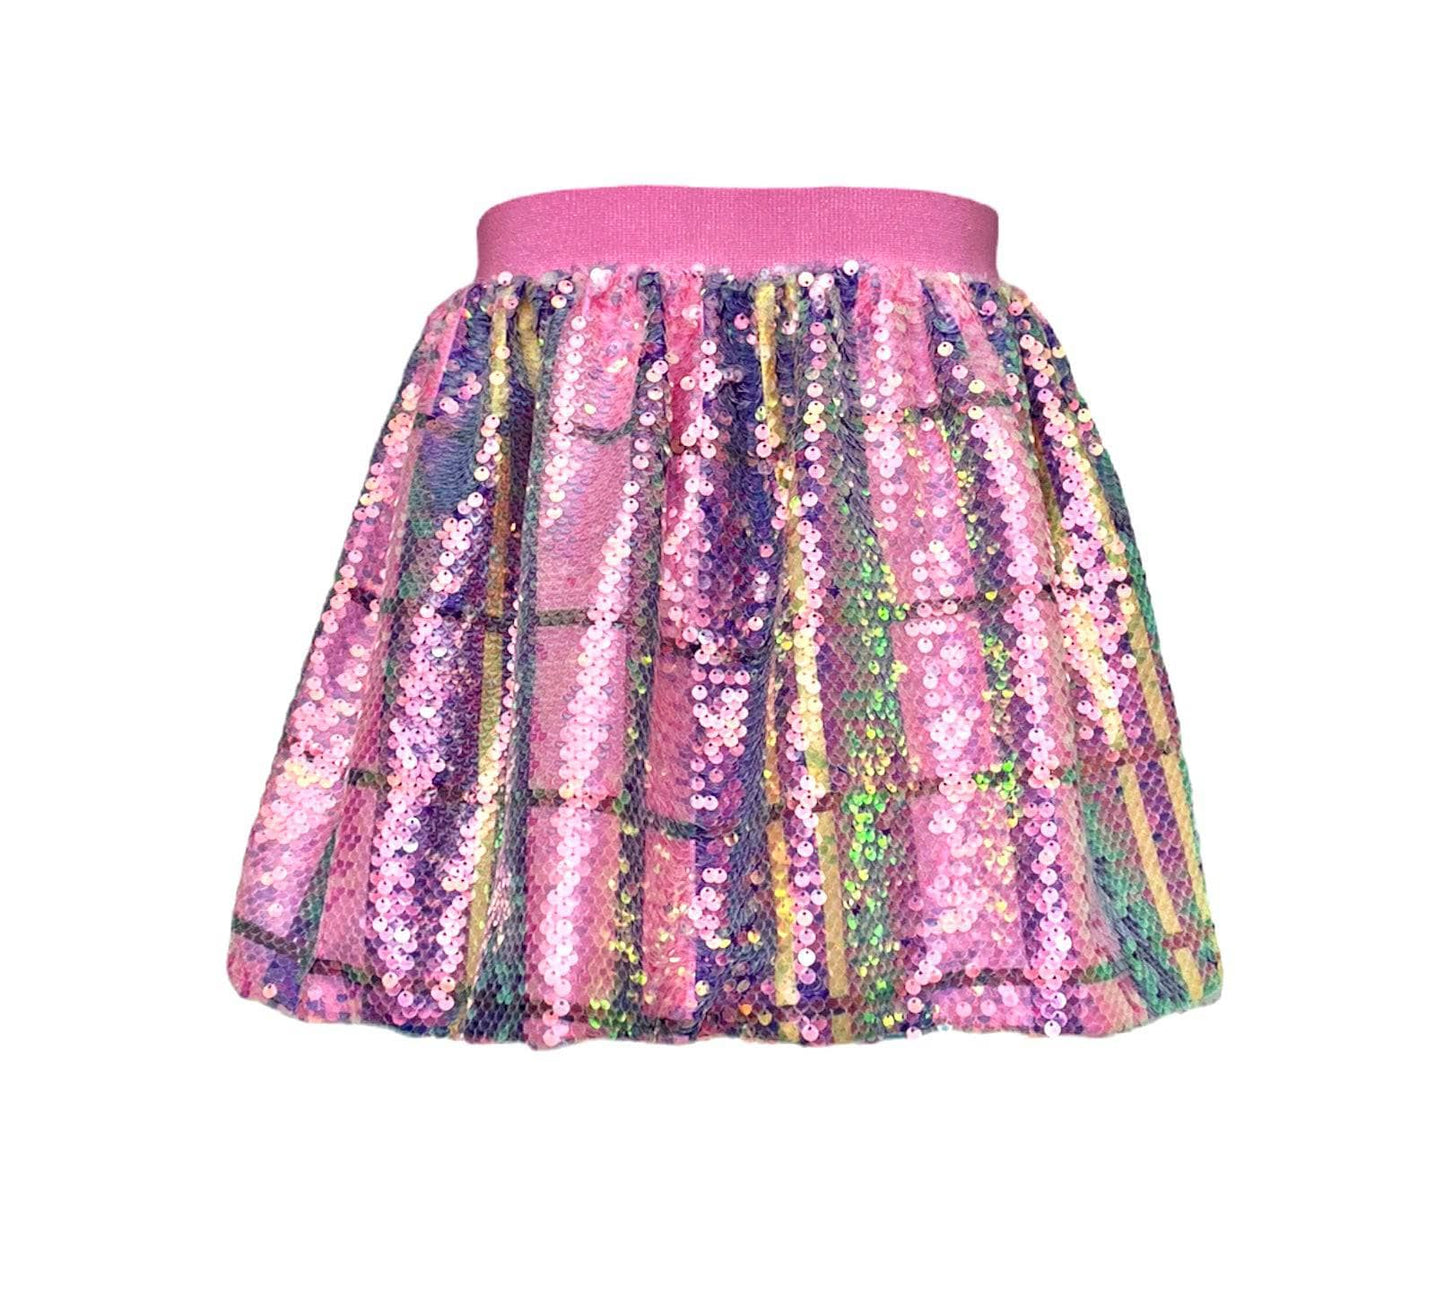 AS IF PLAID SEQUIN SKIRT